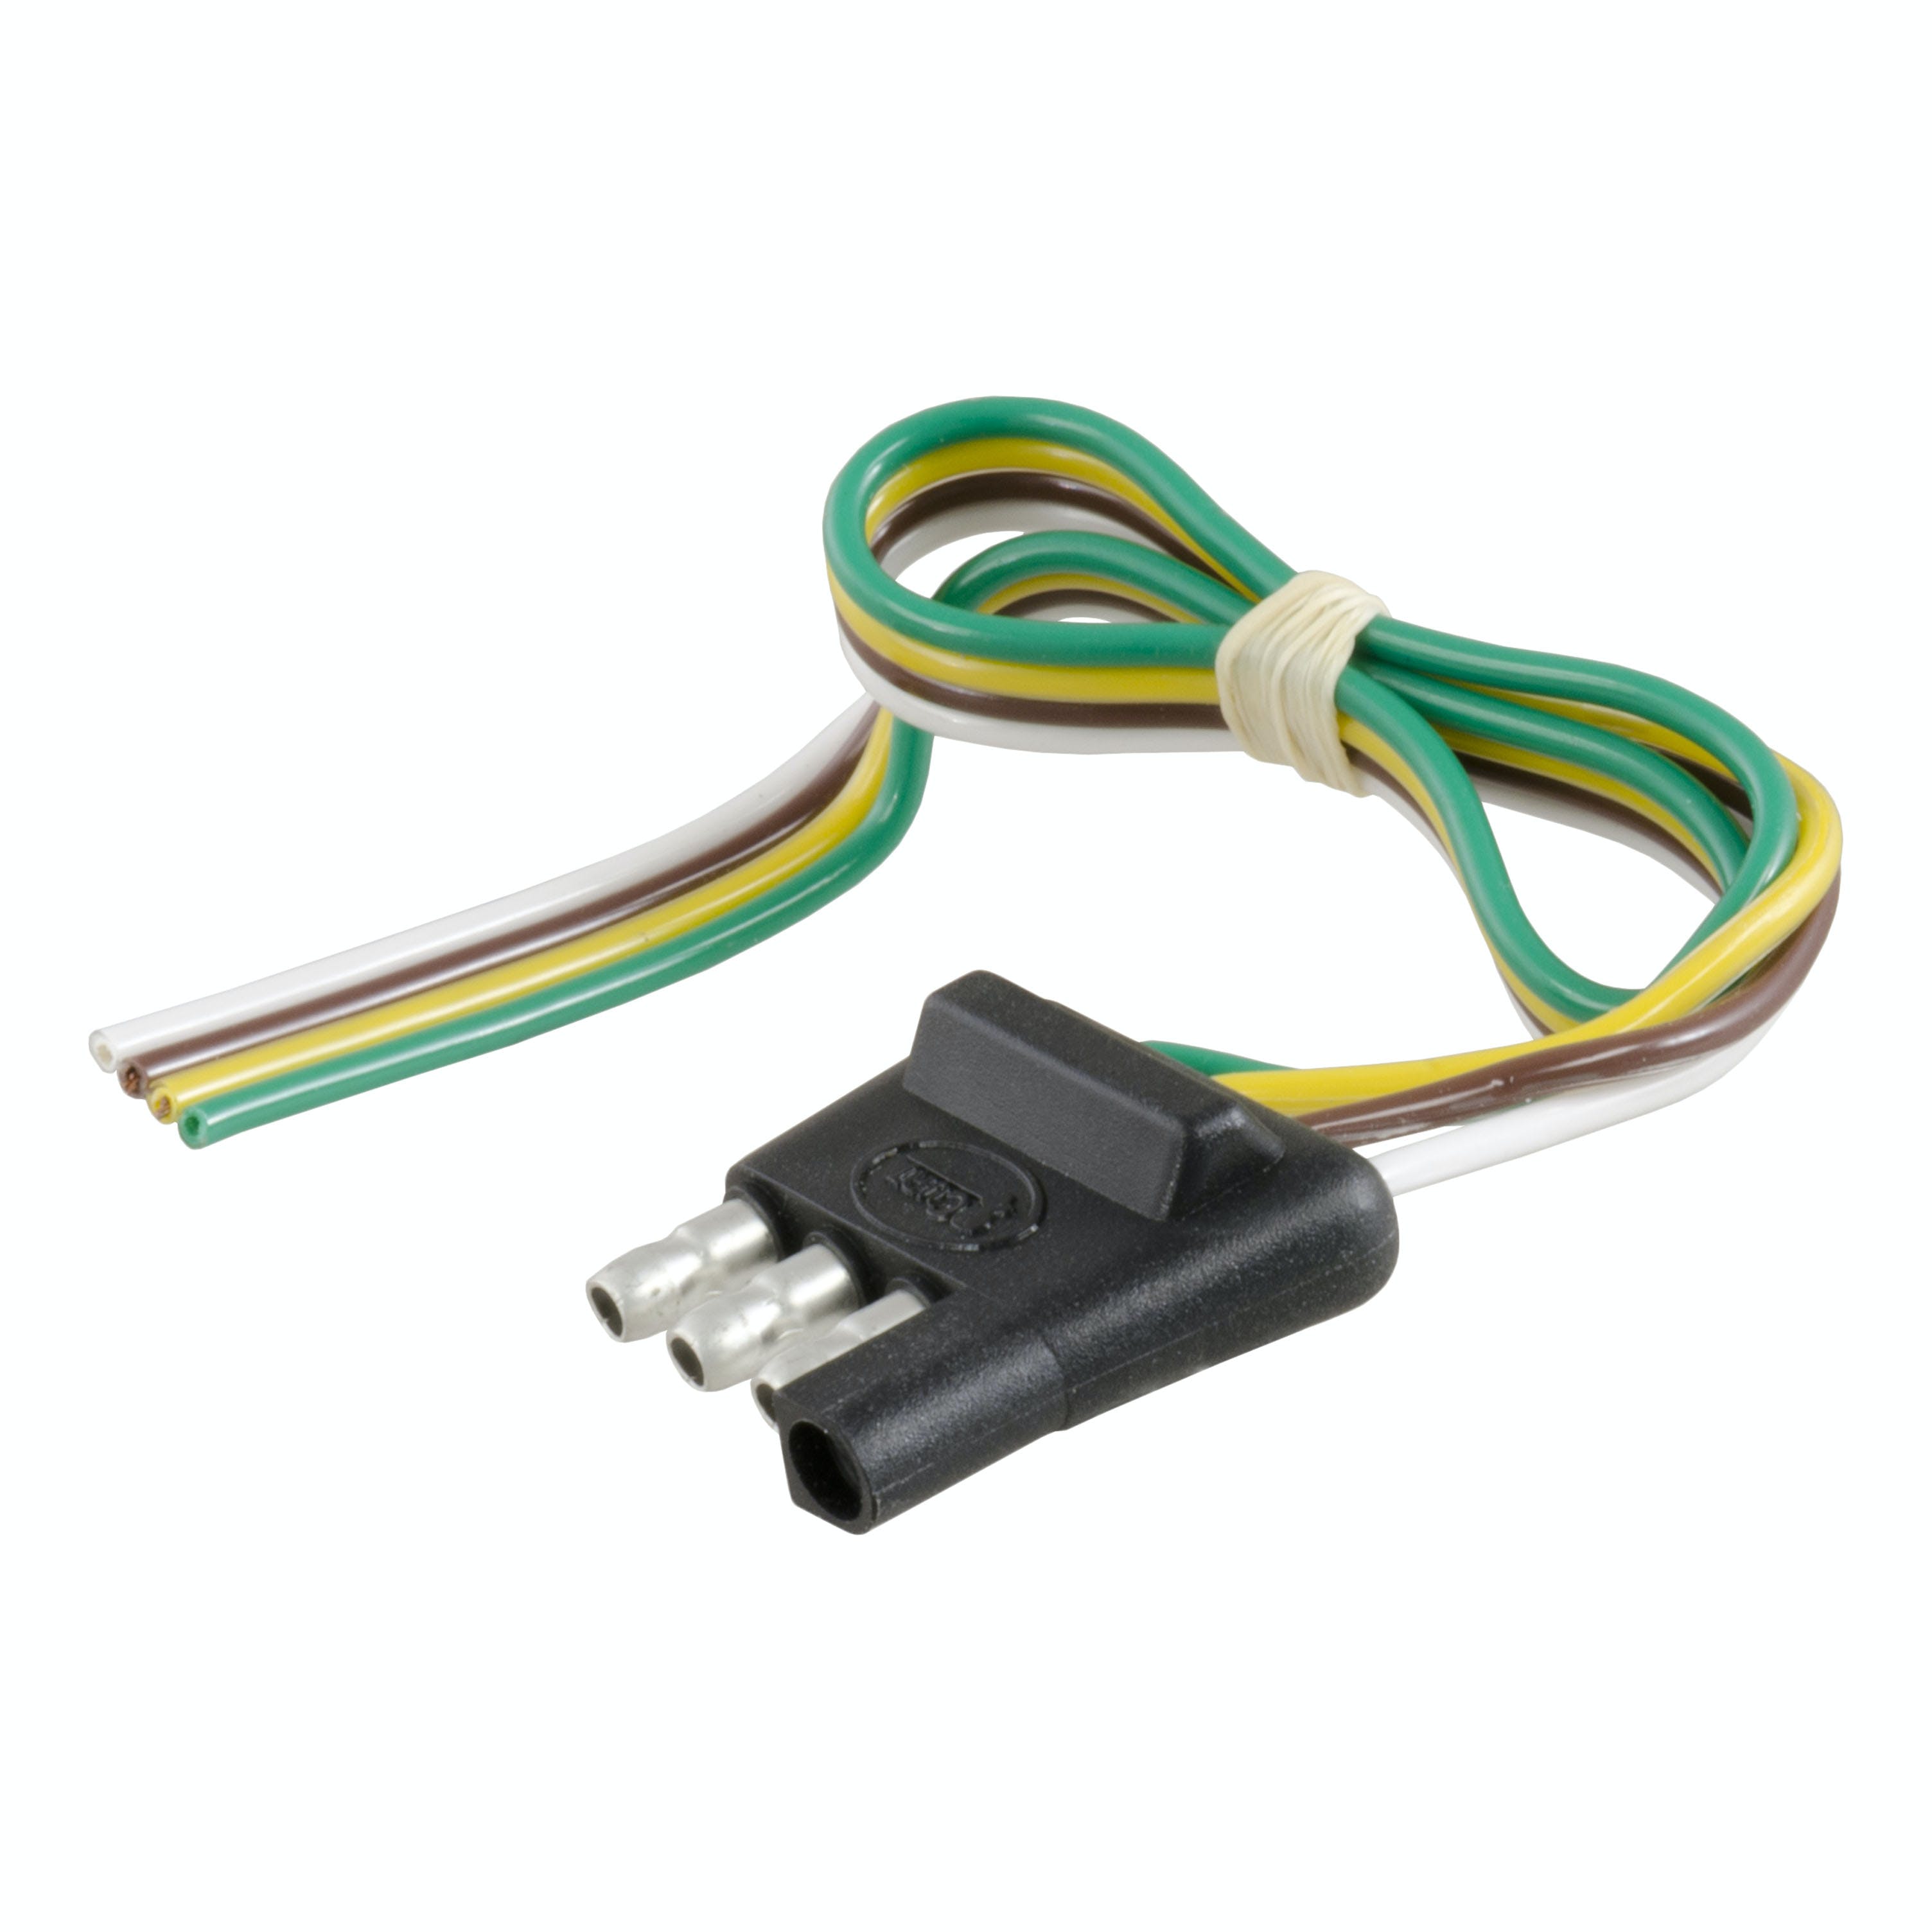 CURT 58030 4-Way Flat Connector Plug with 12 Wires (Trailer Side)